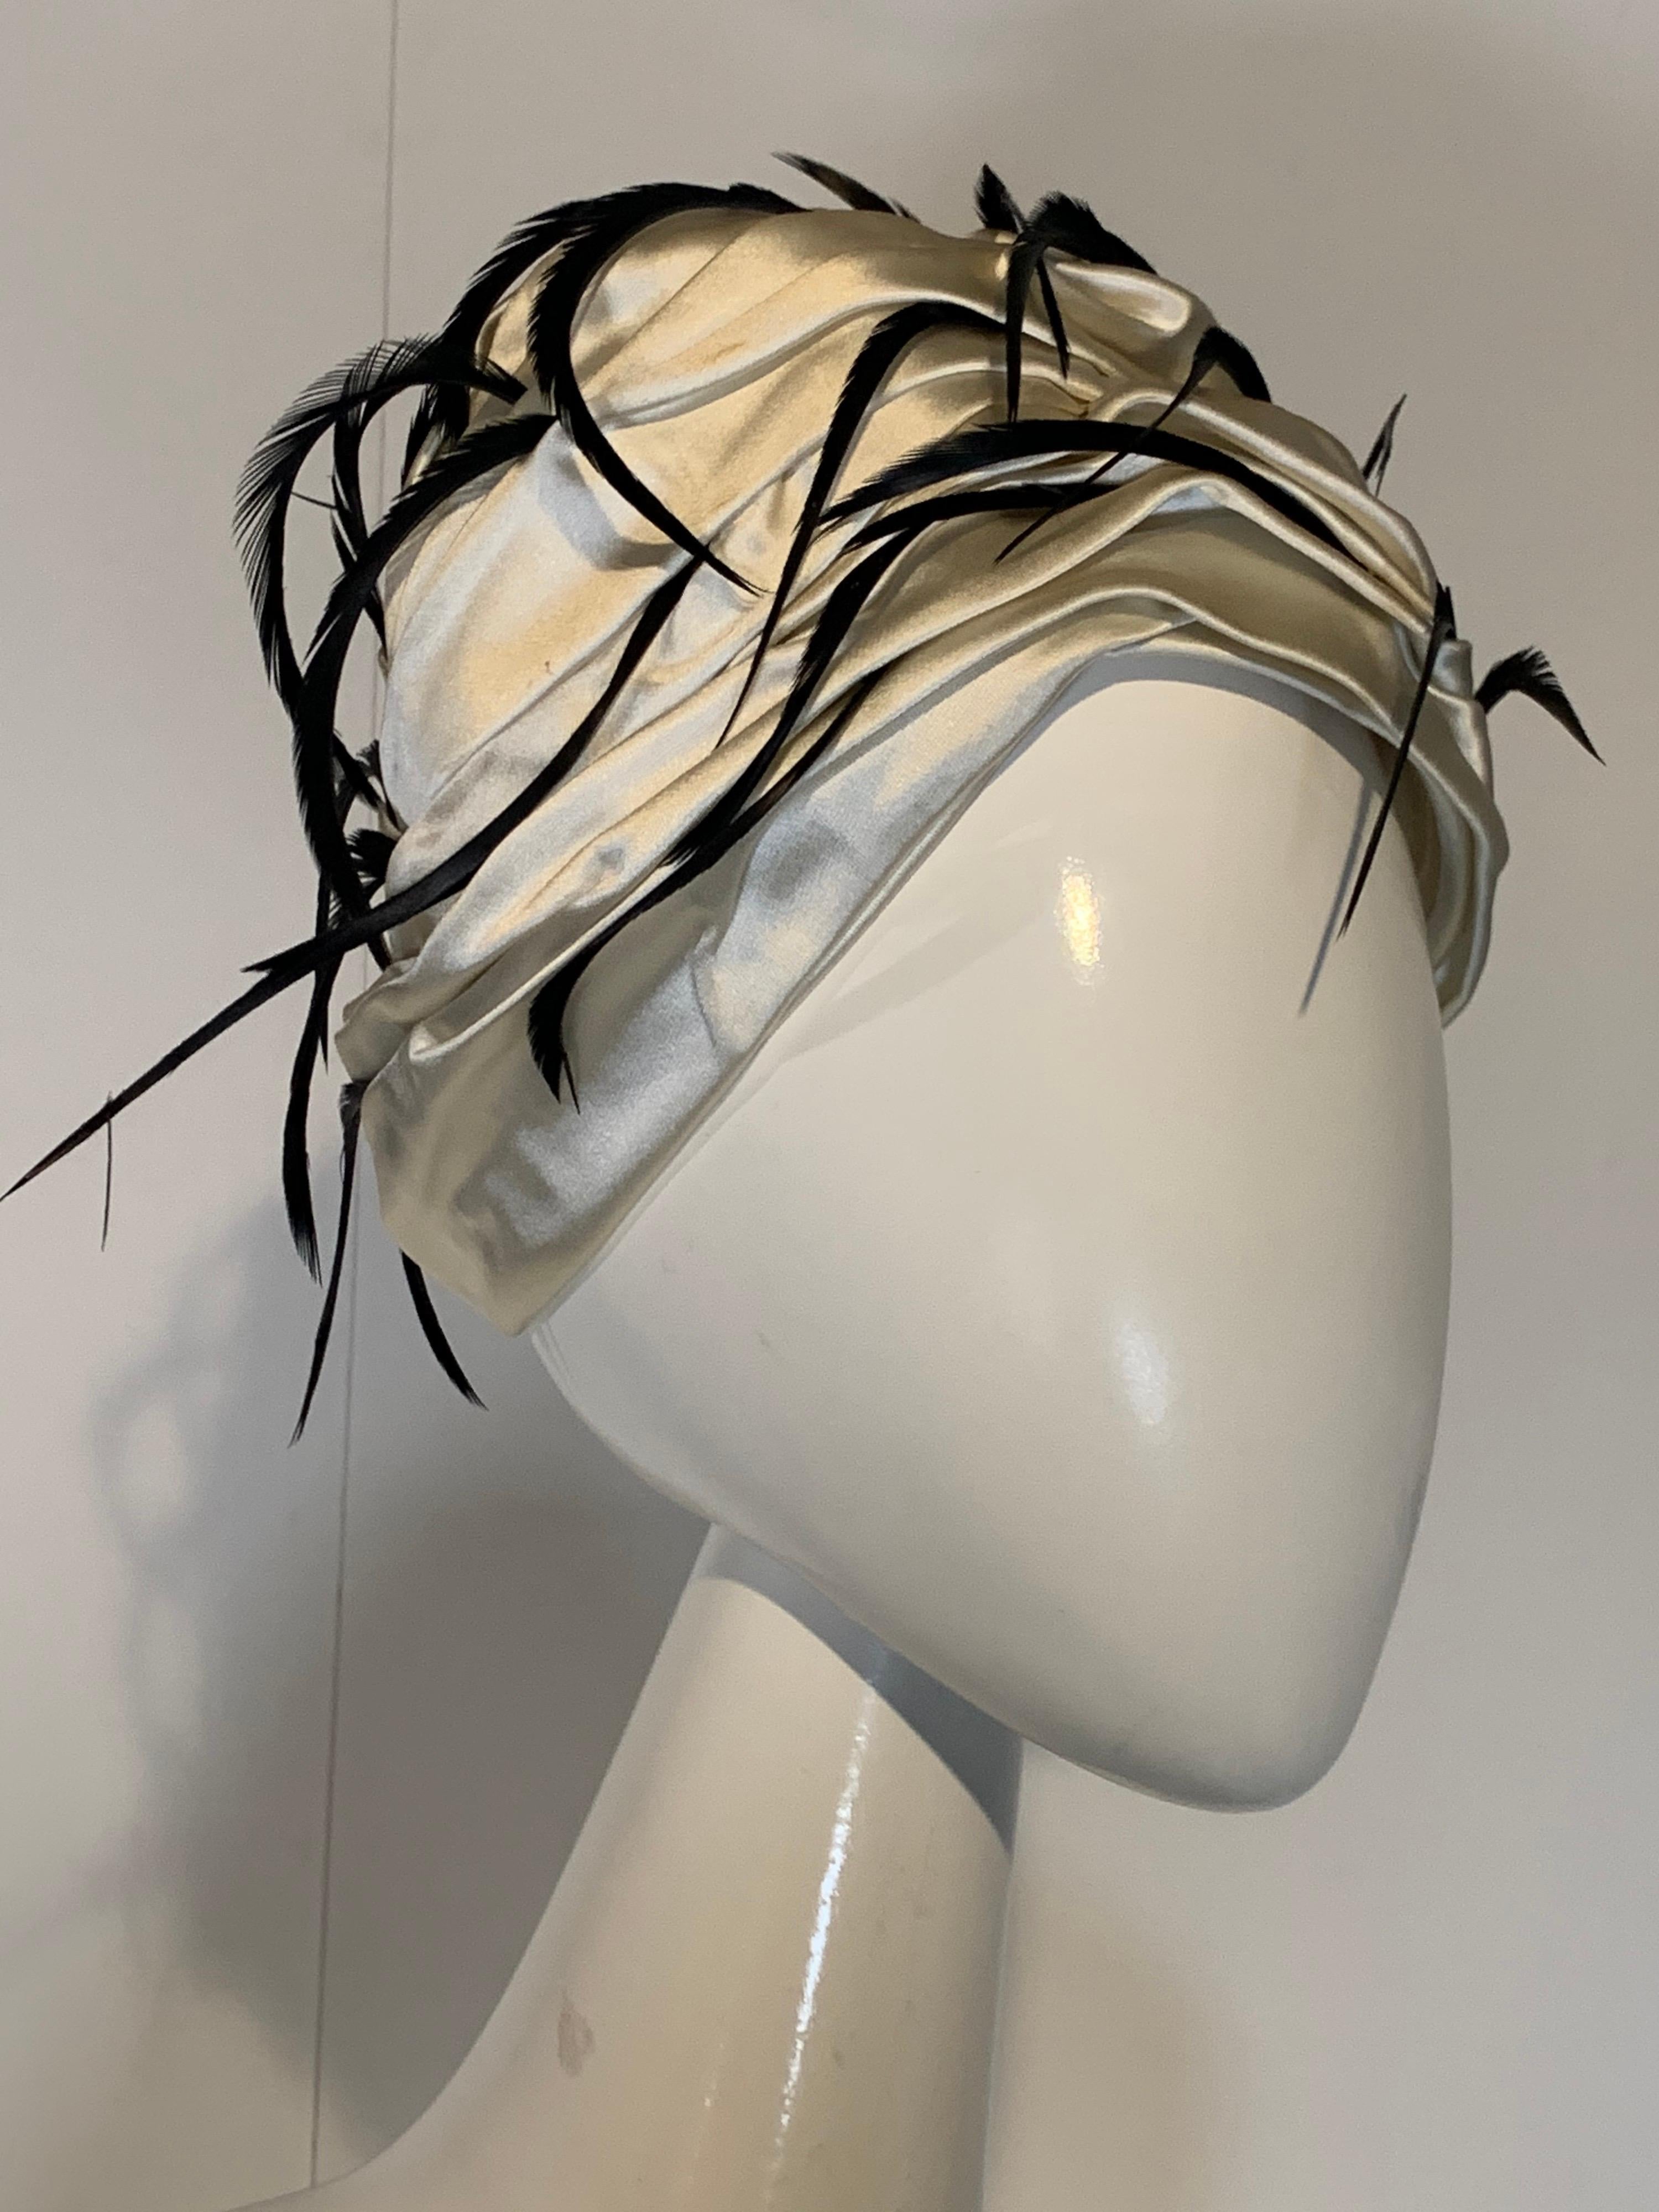 A stunning 1960s Christian Dior by Marc Bohan eggshell satin pleated turban hat with crisp black coq feathers fluttering from the pleats!  Lovely and captivating movement!  Size Medium 